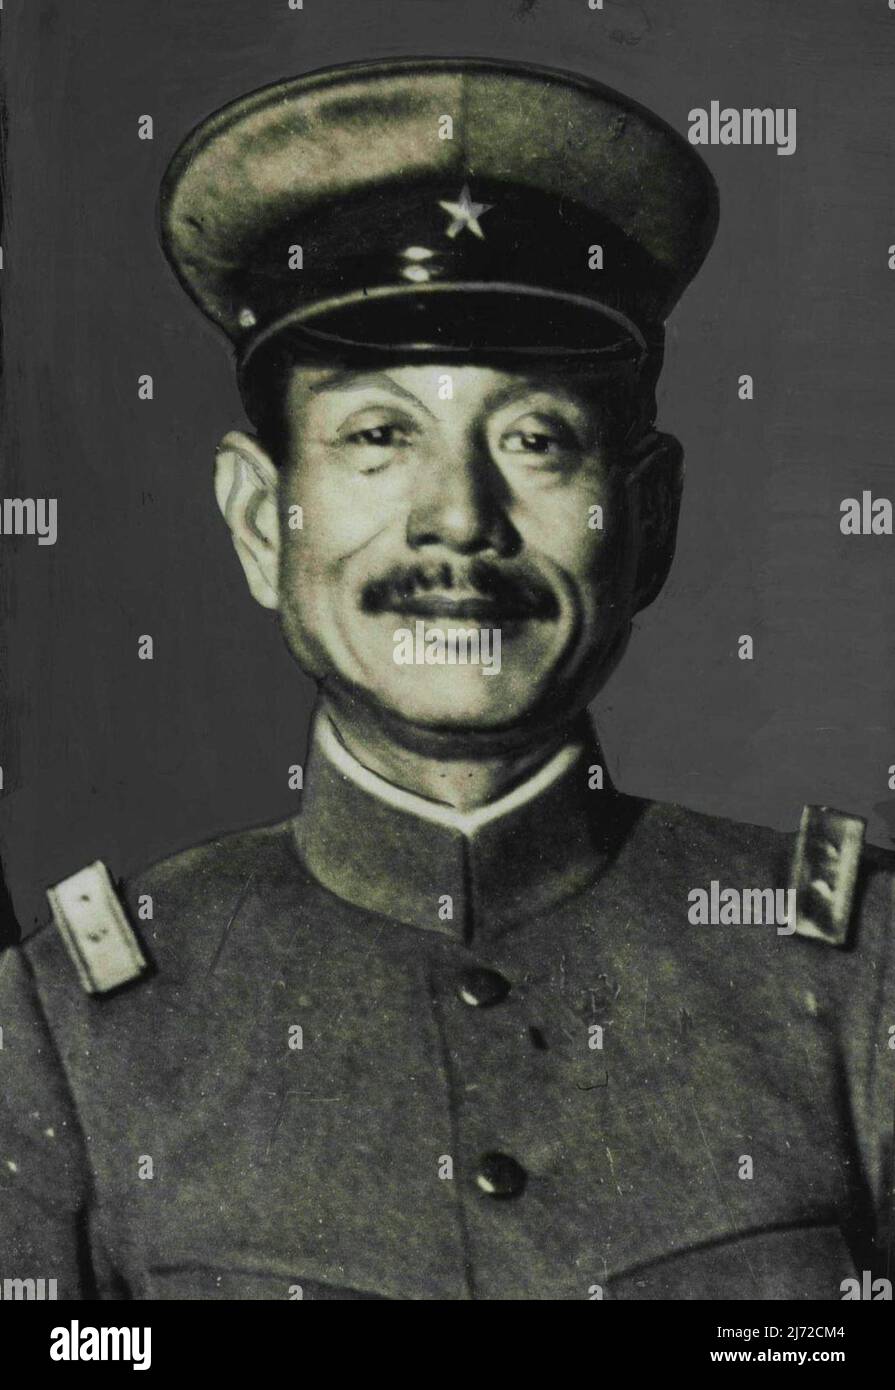 General Iwane Matsui who is in ***** the Japanese forces in Shanghai. September 1, 1937. (Photo by Universal Pictorial & Agency). Stock Photo